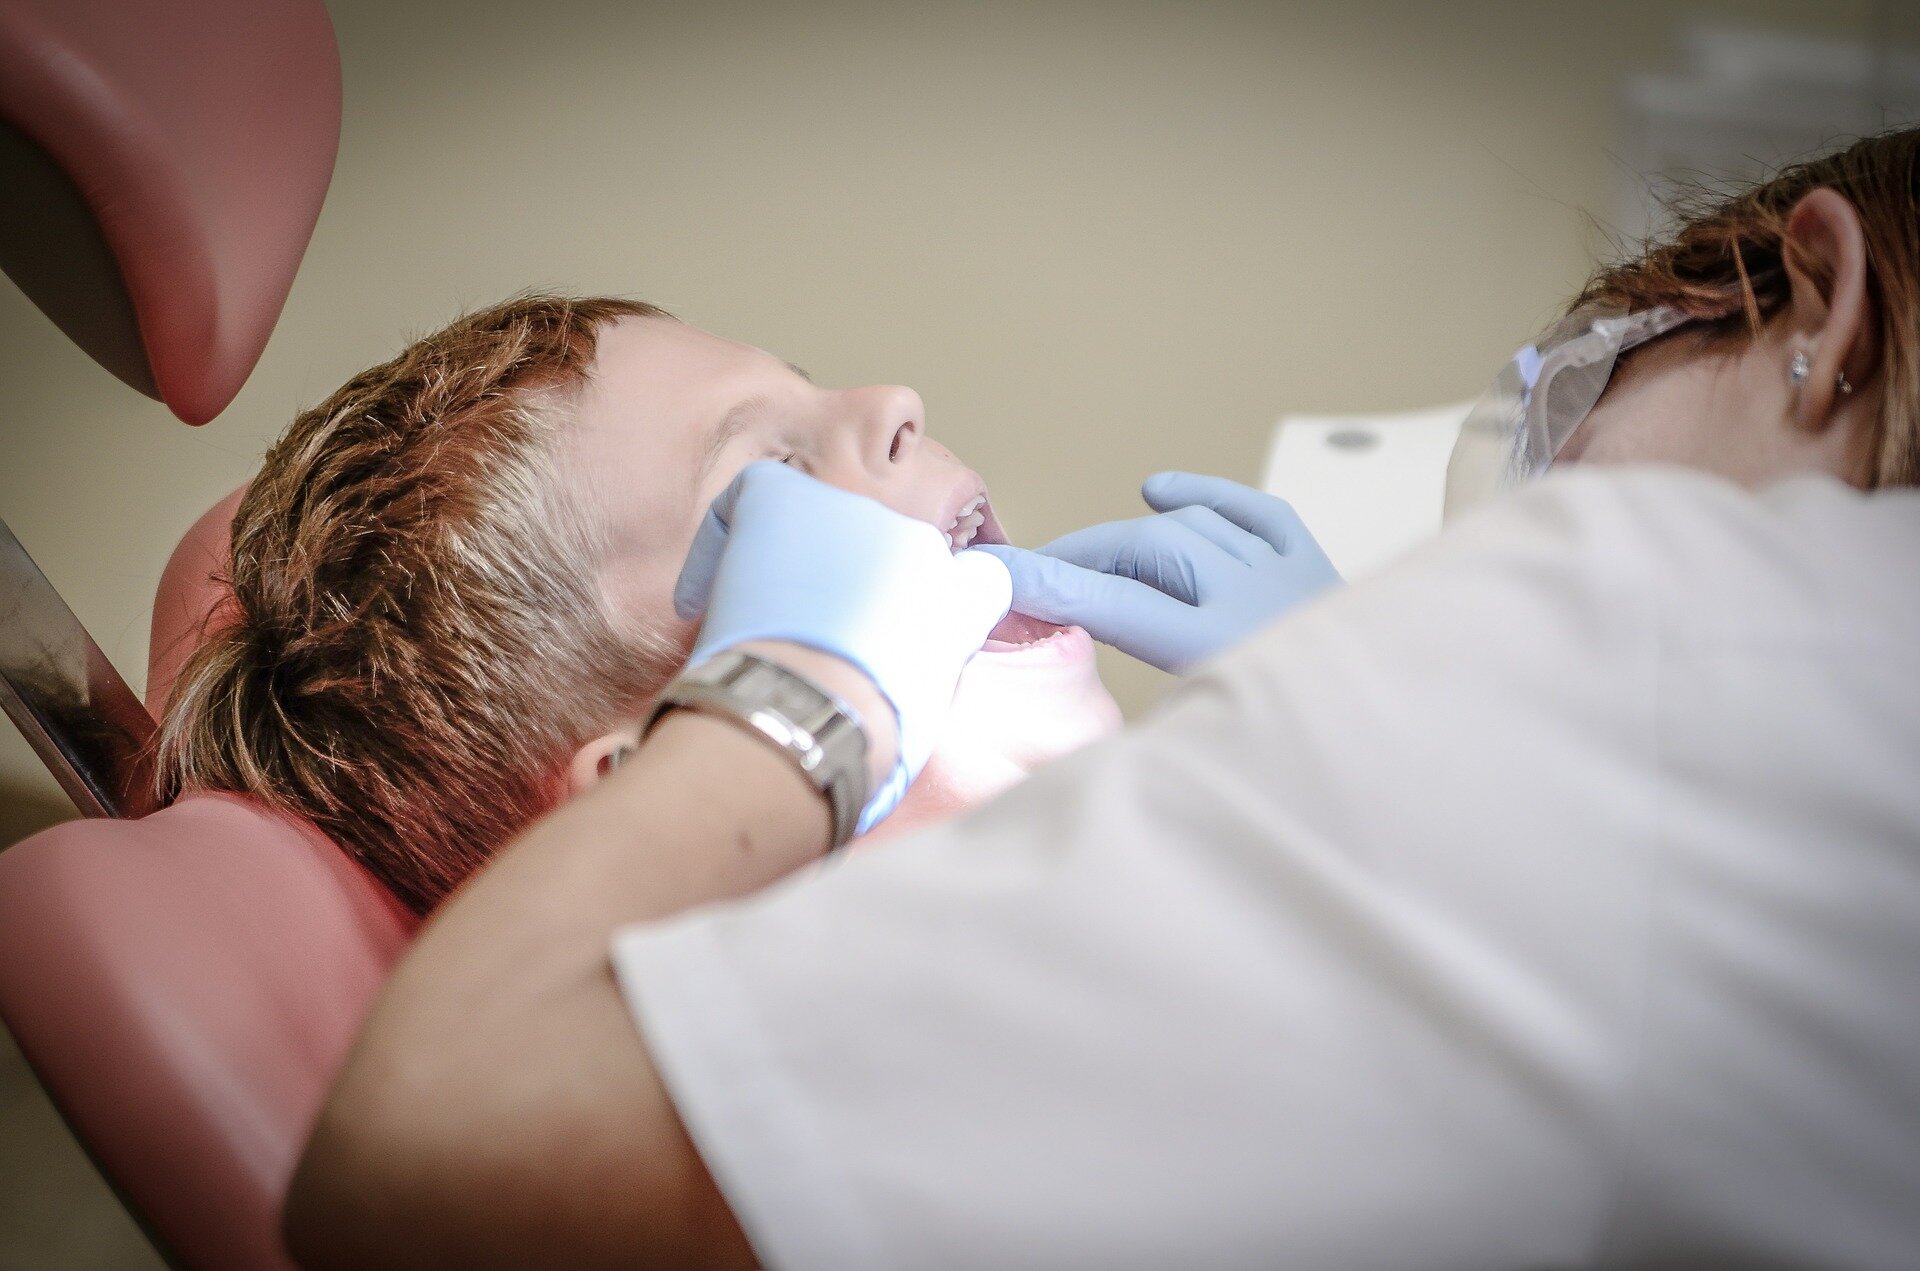 Children living in deprived areas are three times more likely to need dental extractions in hospital, finds study